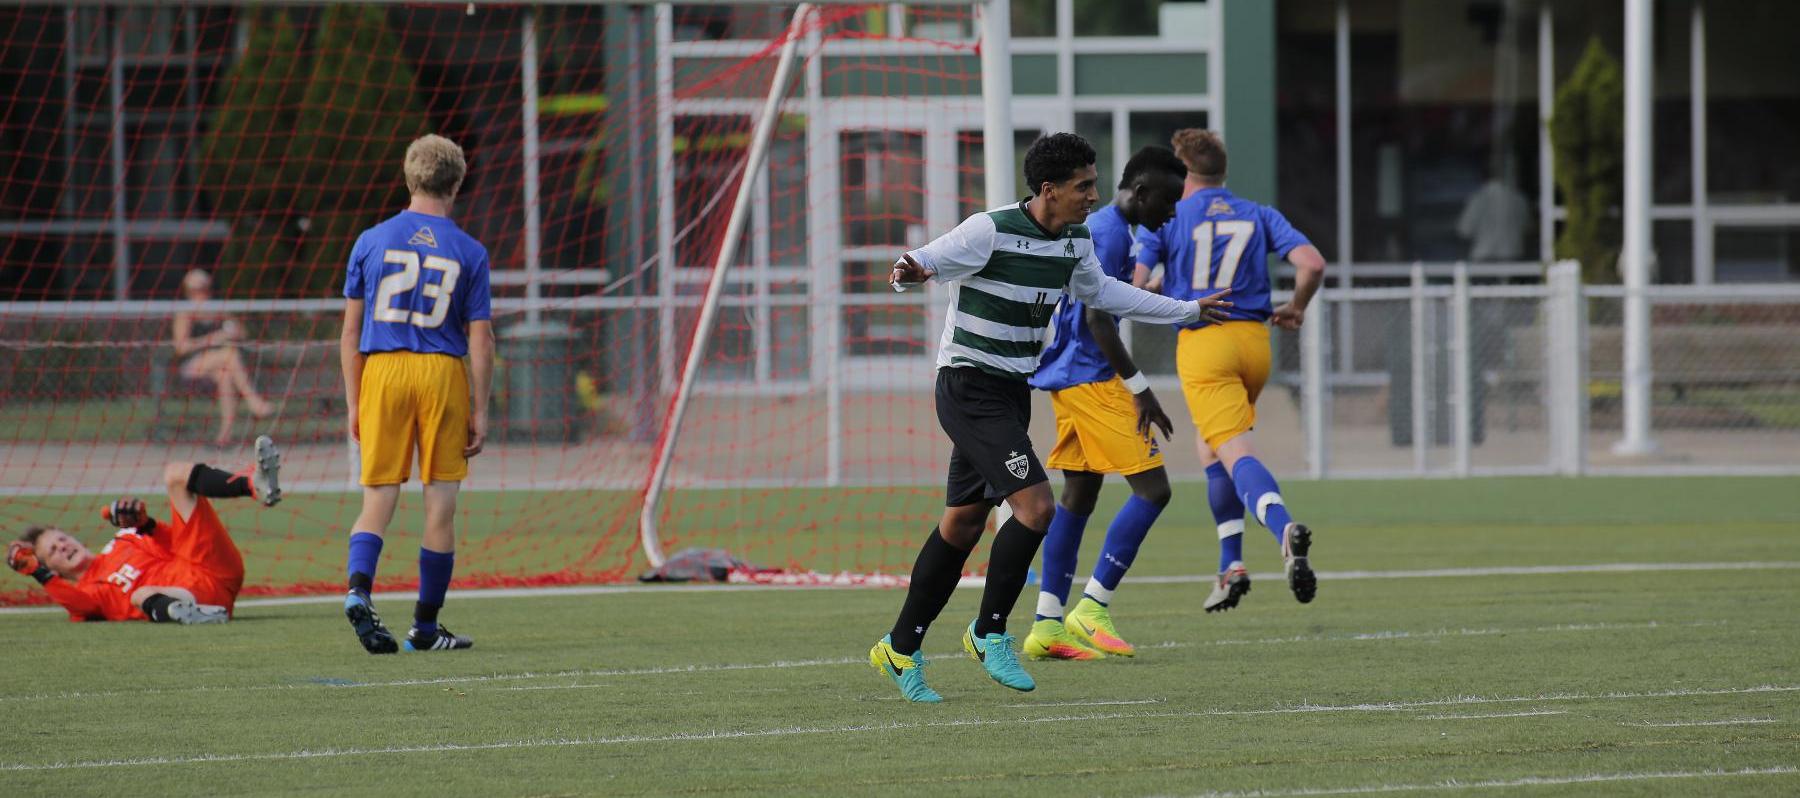 Men's Soccer Cant Hold On To Early Lead Against SUNY-Fredonia